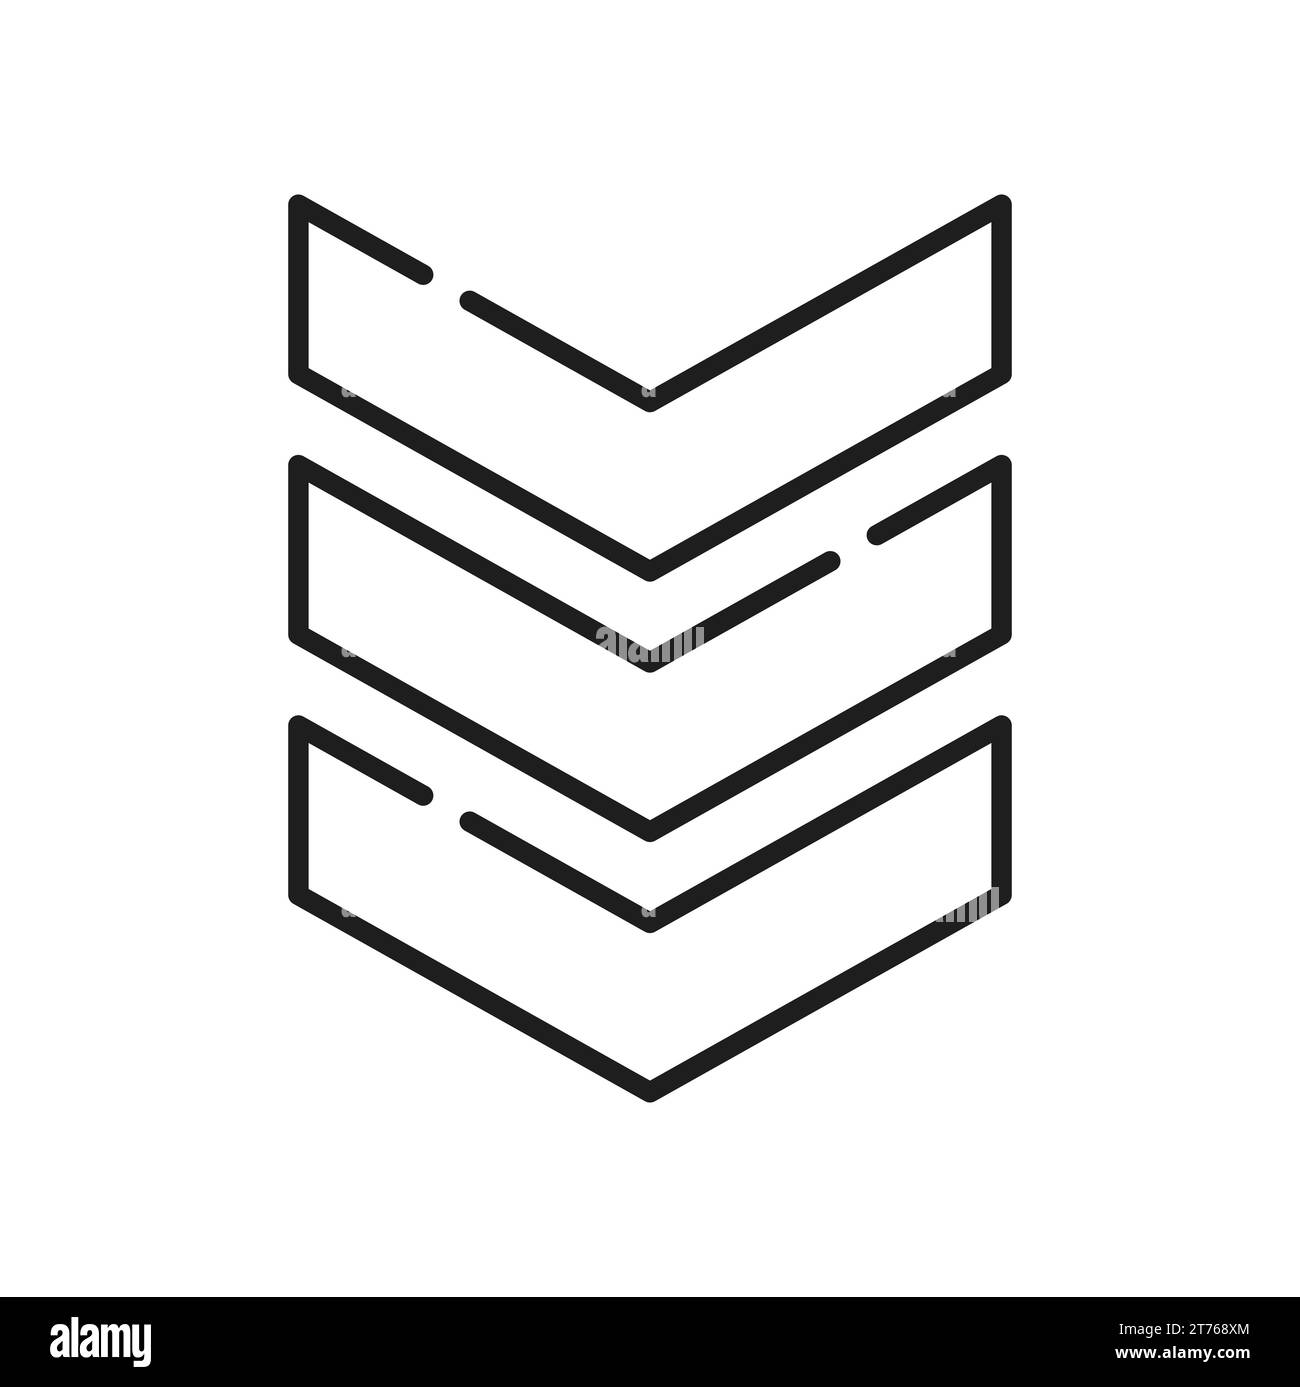 Sergeant soldier military rank isolated reward grade quality rating icon. Vector sign on uniform USA service rank chart emblem. Chevron squad, insignia Stock Vector